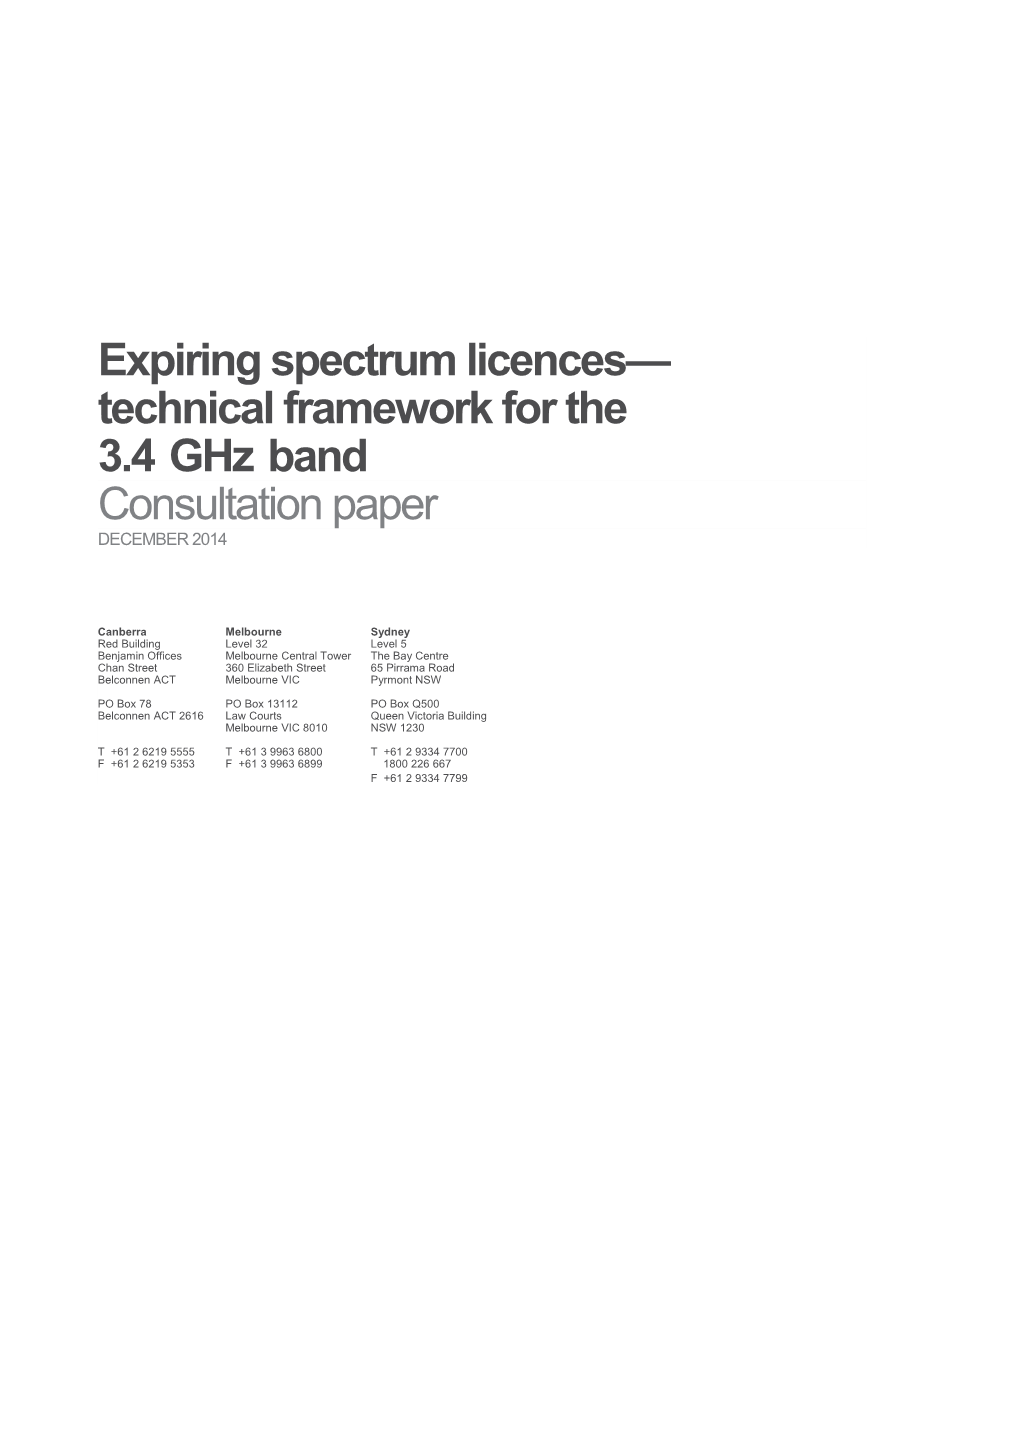 1. Proposed Technical Framework Revisions